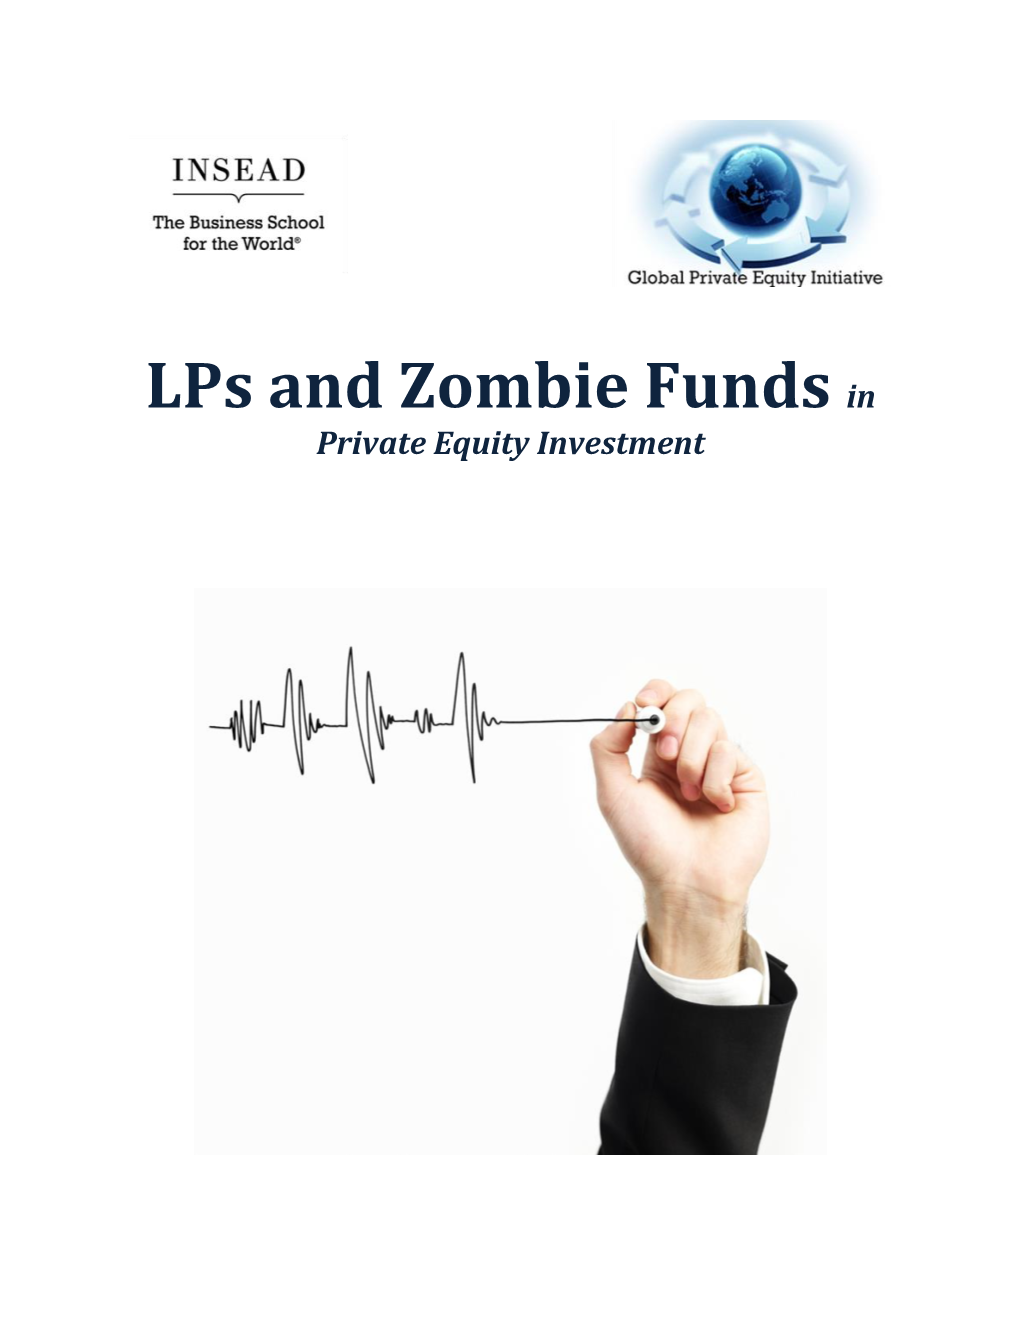 Lps and Zombie Funds in Private Equity Investment